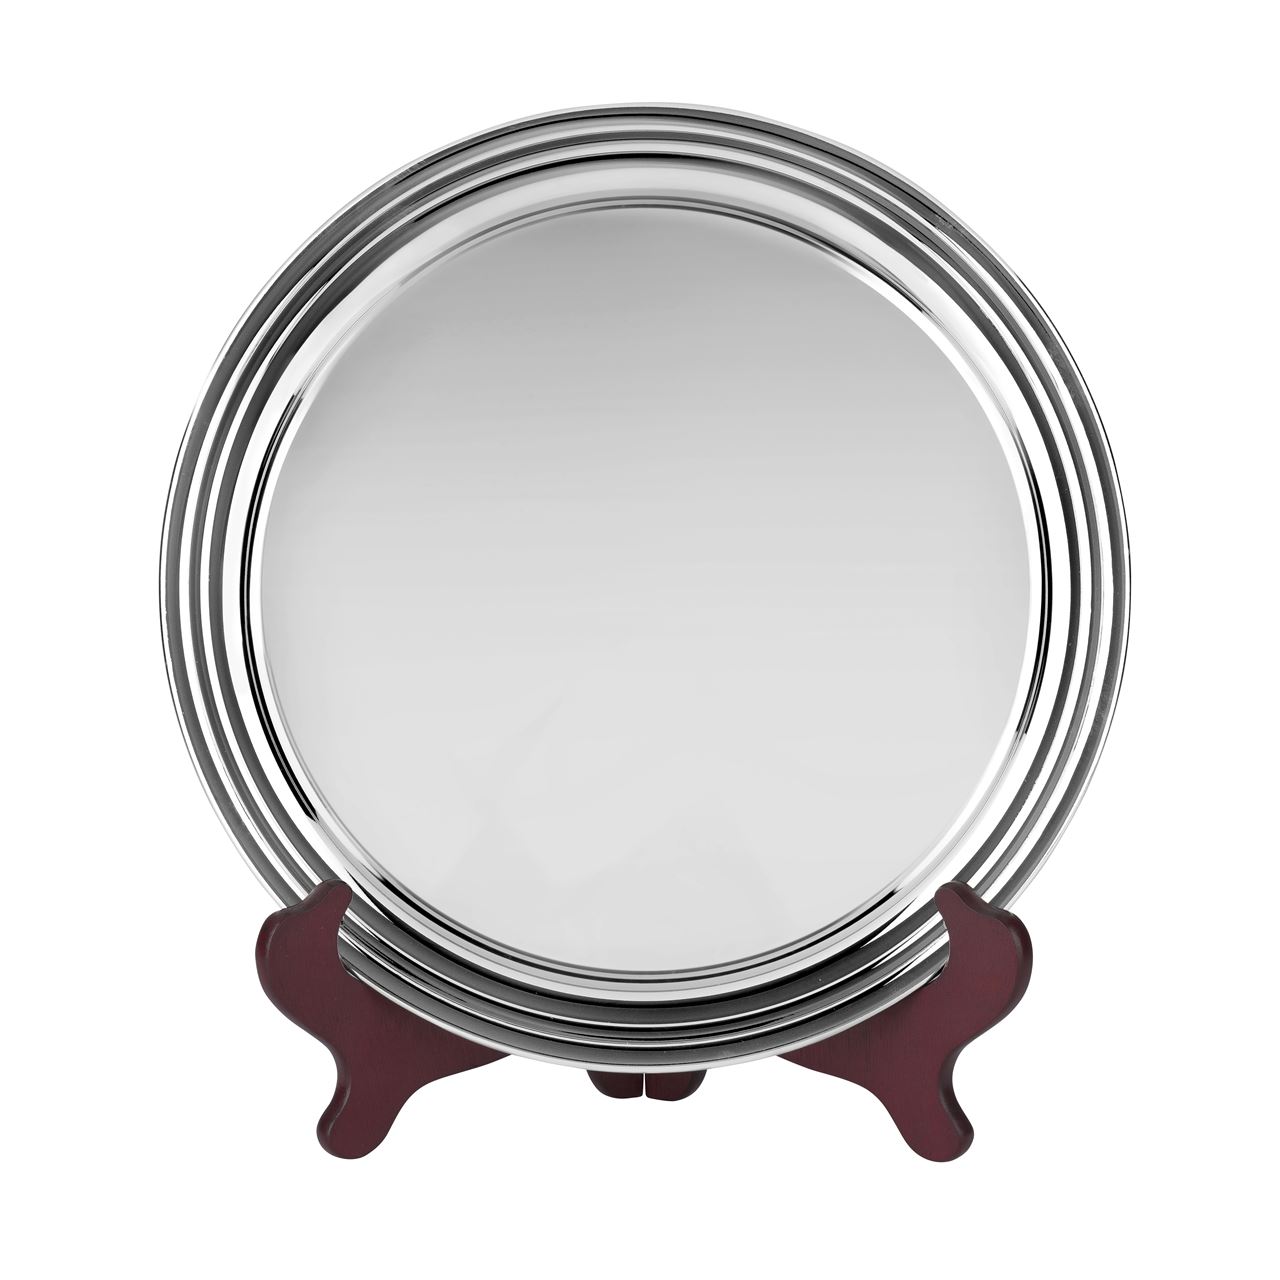 Heavy Gauge Nickel Plated Round Tray With Plain Edge - S8